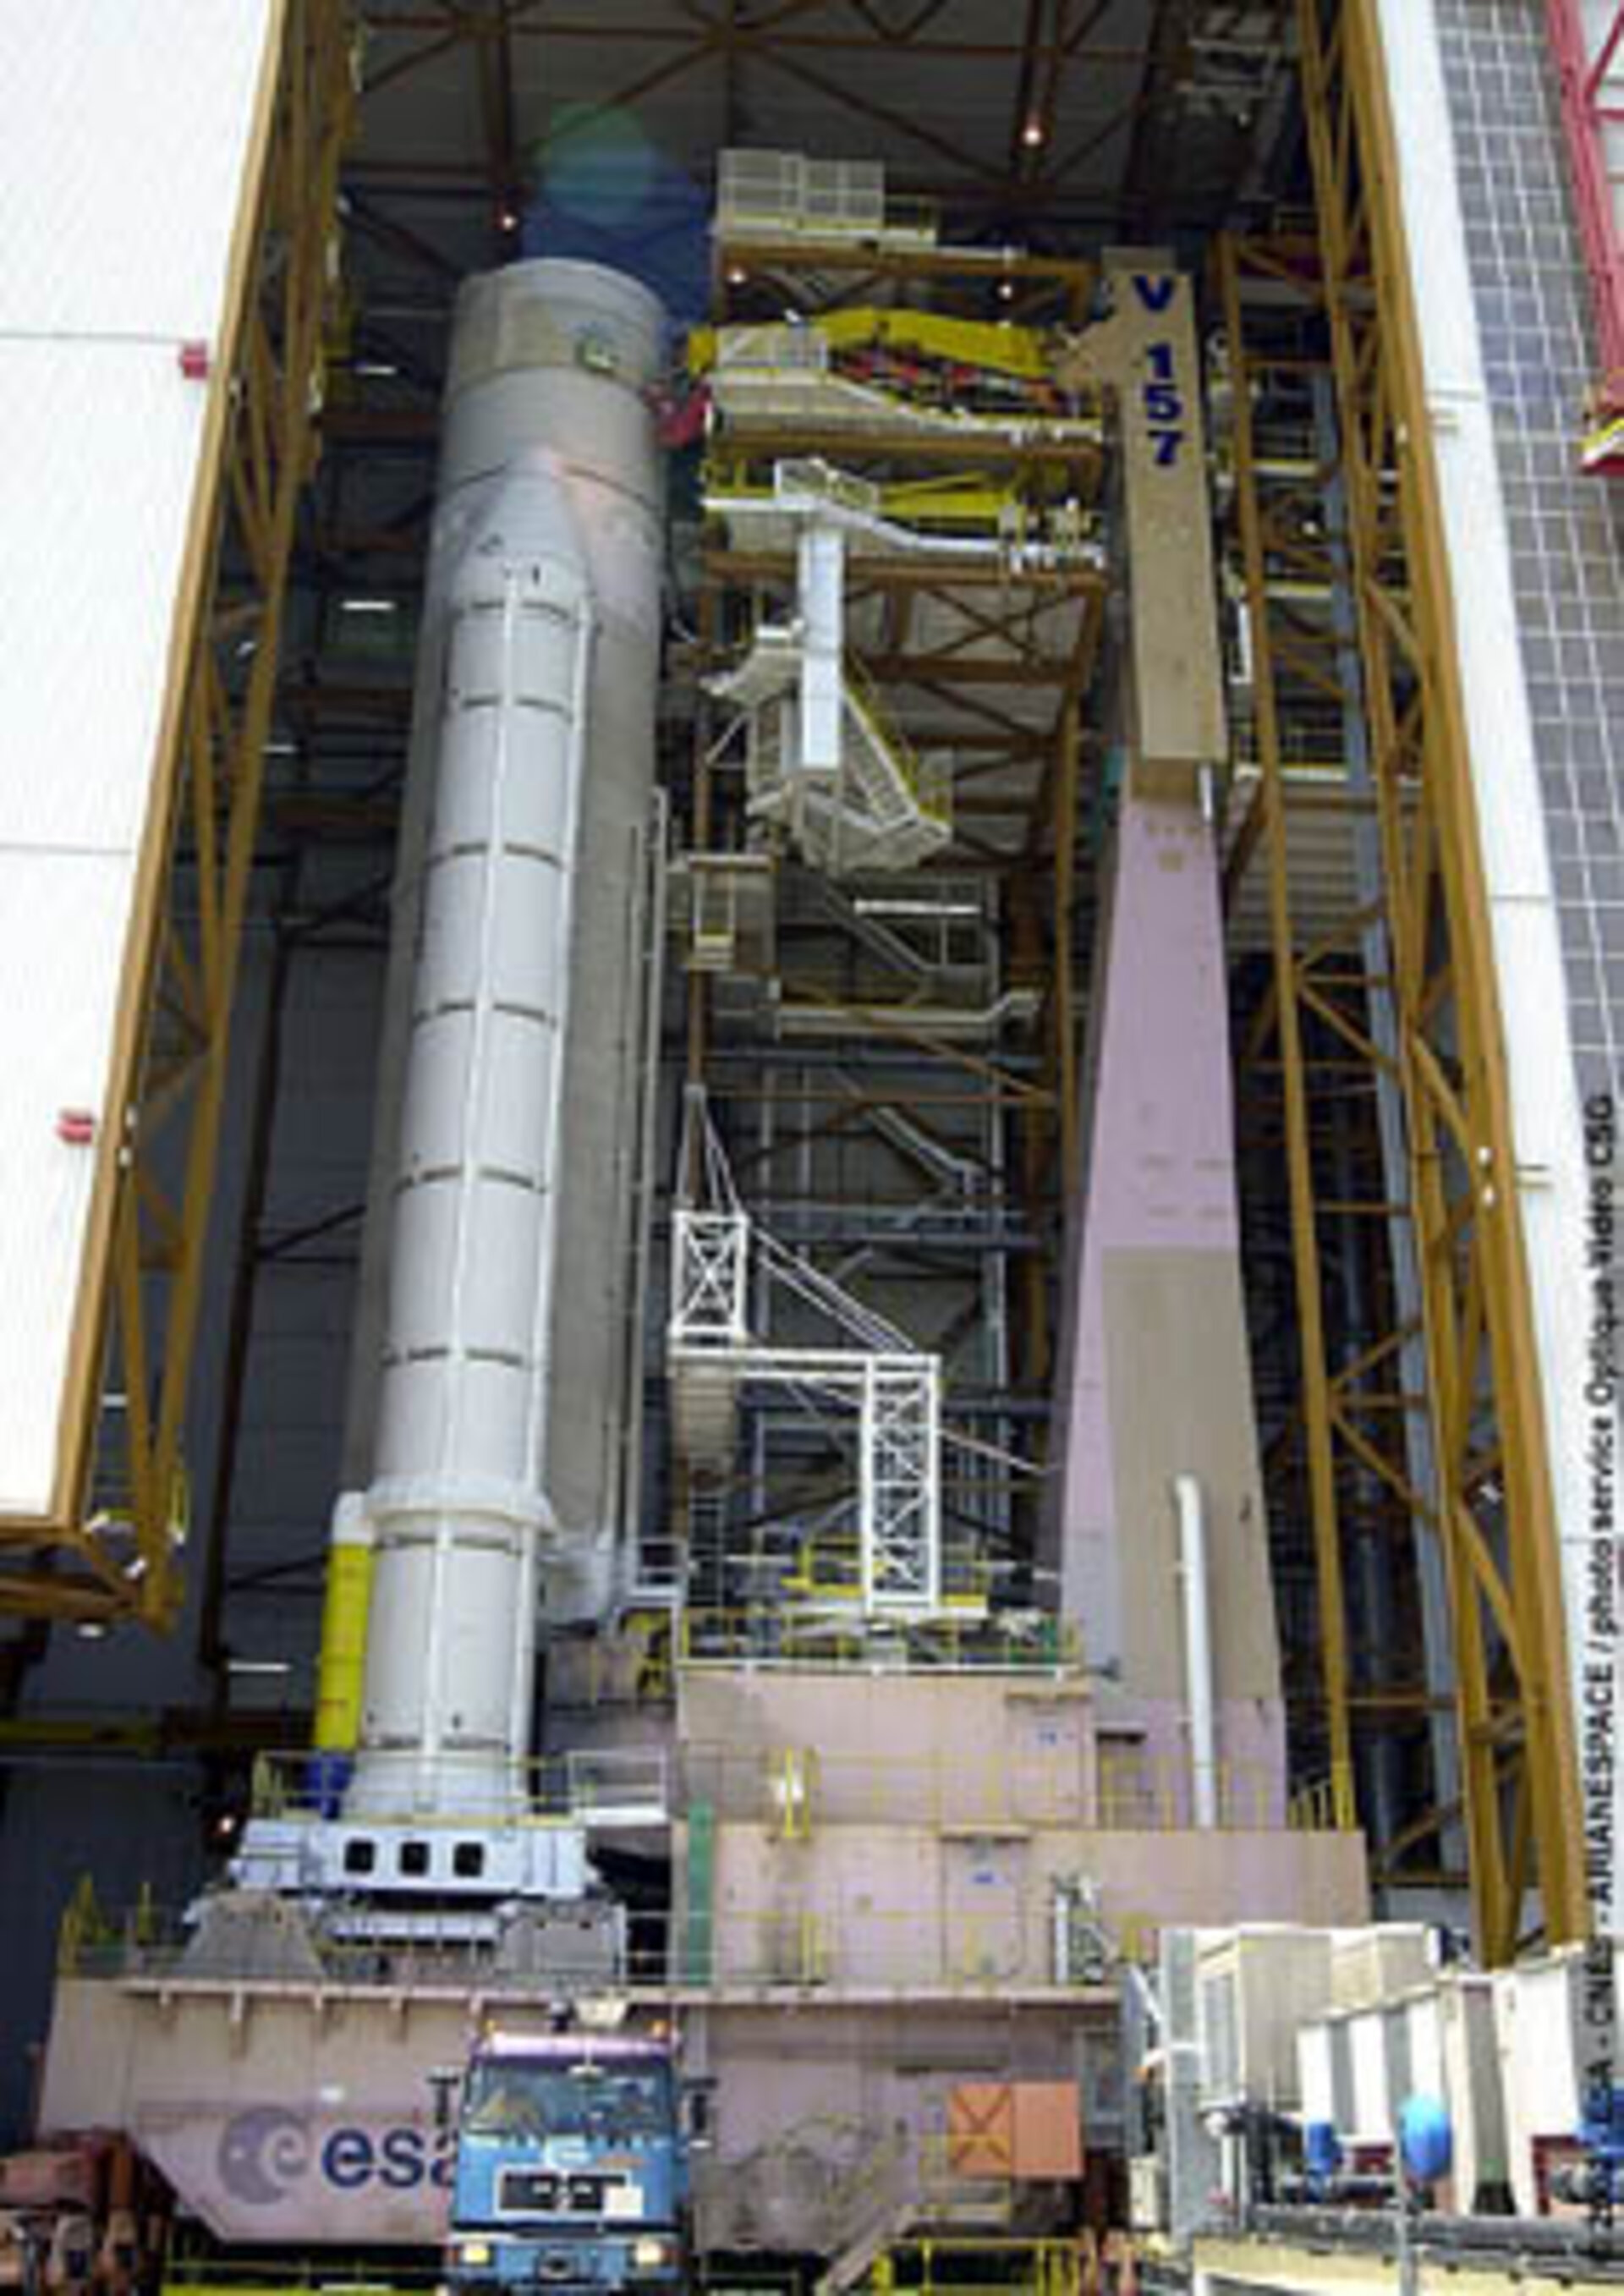 Flight 157 - Ariane 5 ready to move to the final assembly facilty